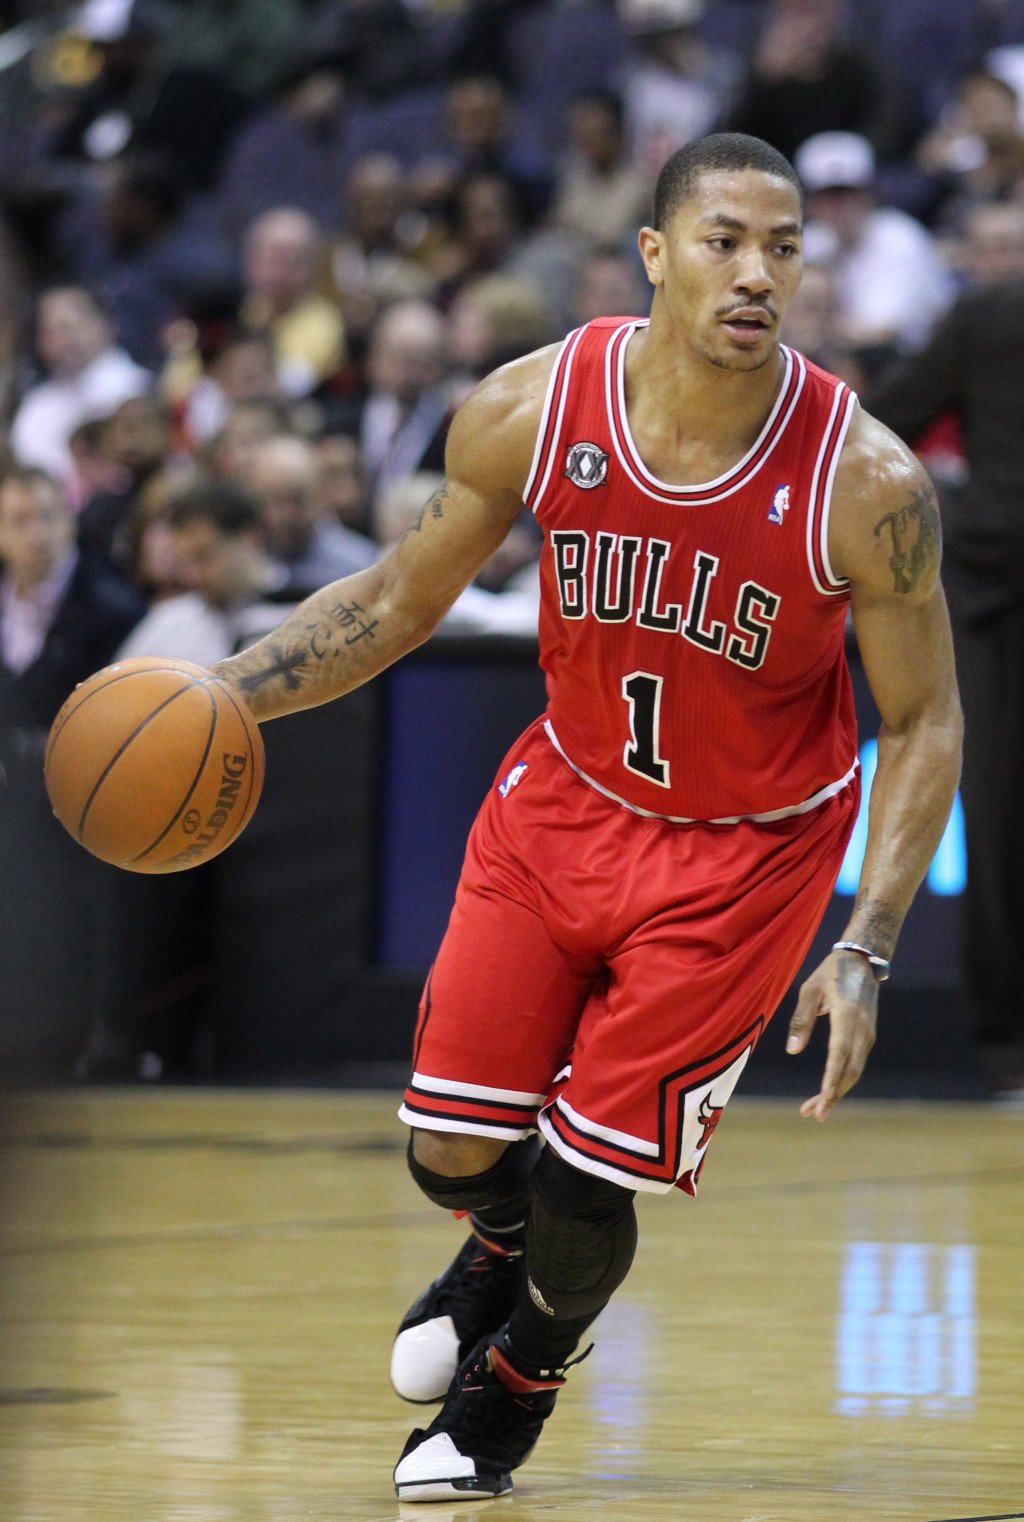 Derrick Rose Workout & Diet: How this Young High-Flyer Does It | HubPages